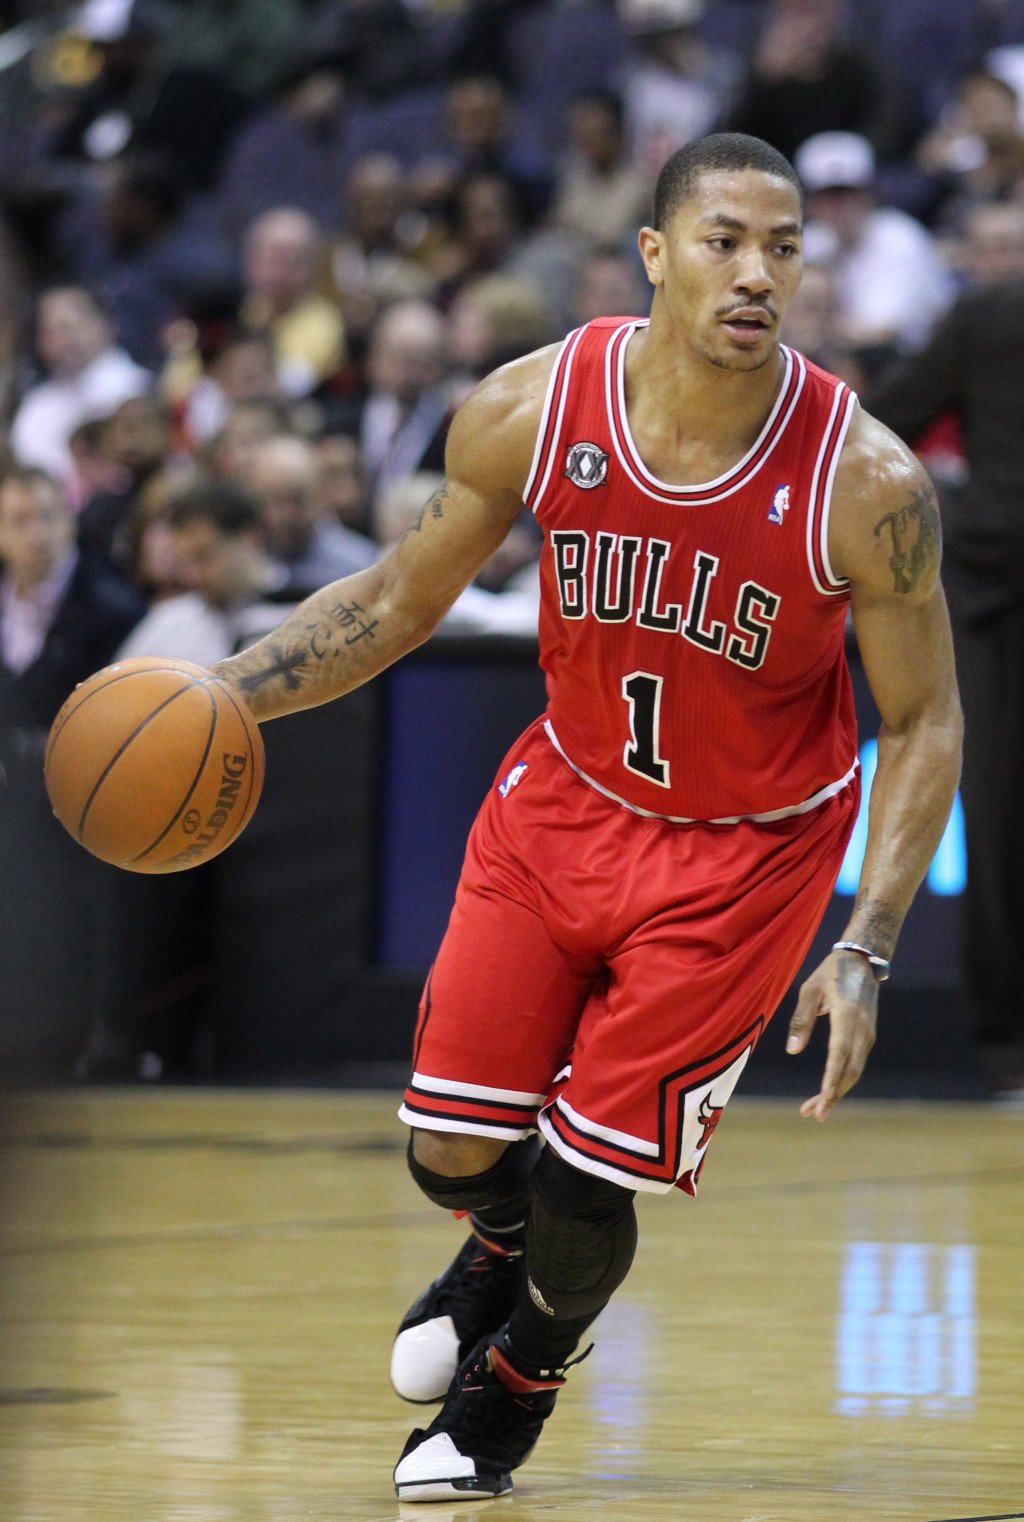 Derrick Rose Workout & Diet: How this Young High-Flyer Does It | HubPages